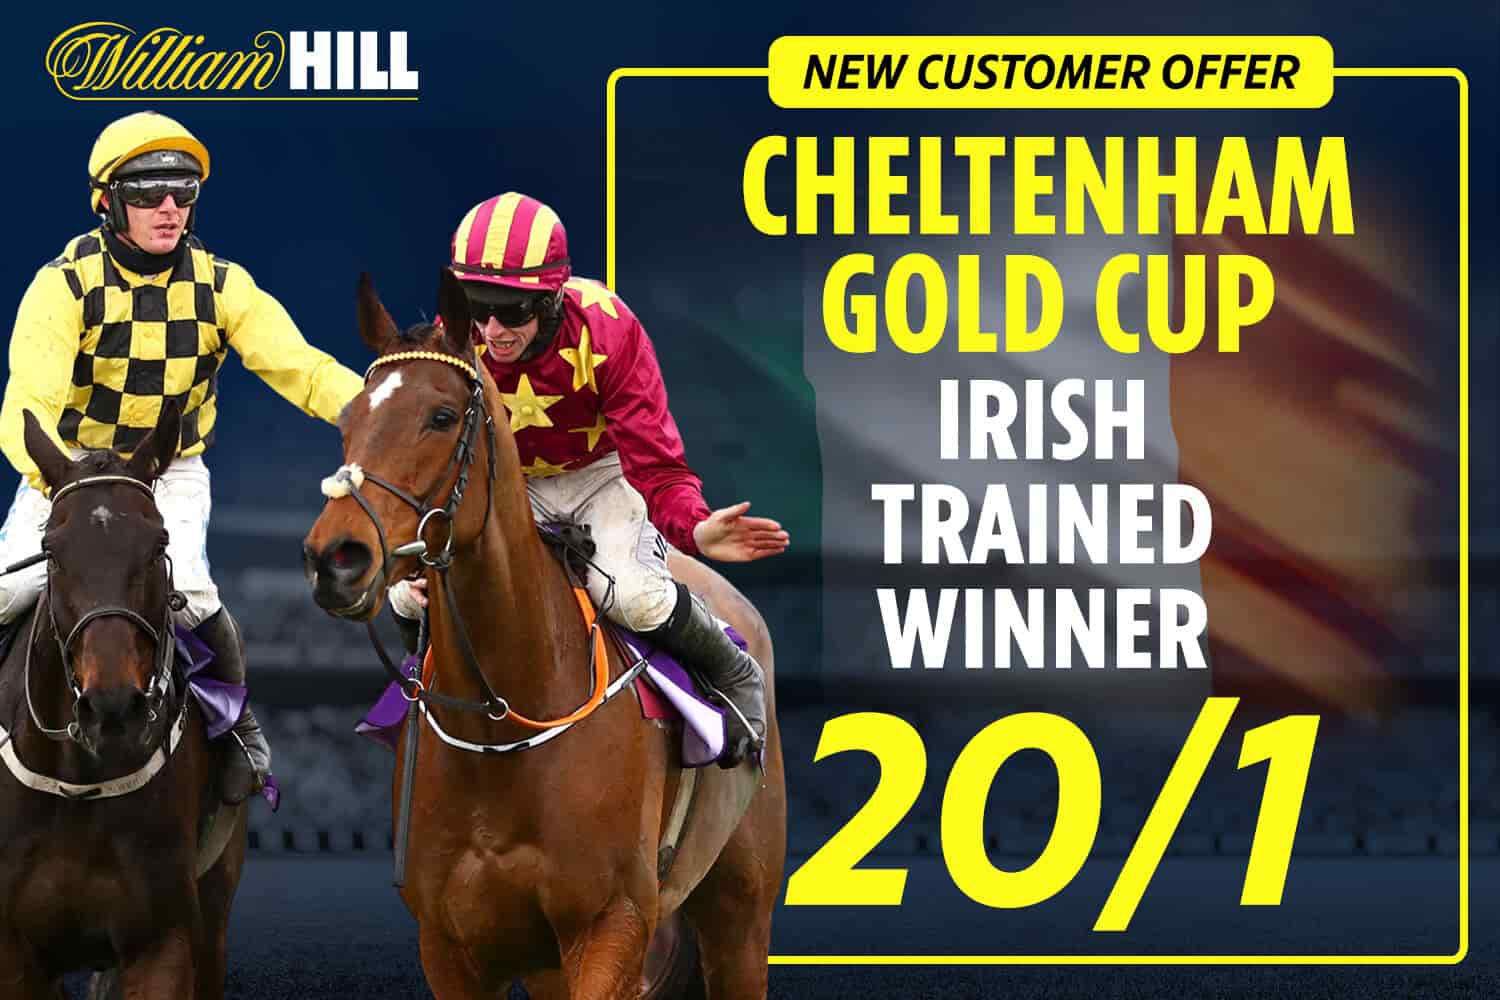 An image of William Hill who are one of the best bookies for horse racing festivals.